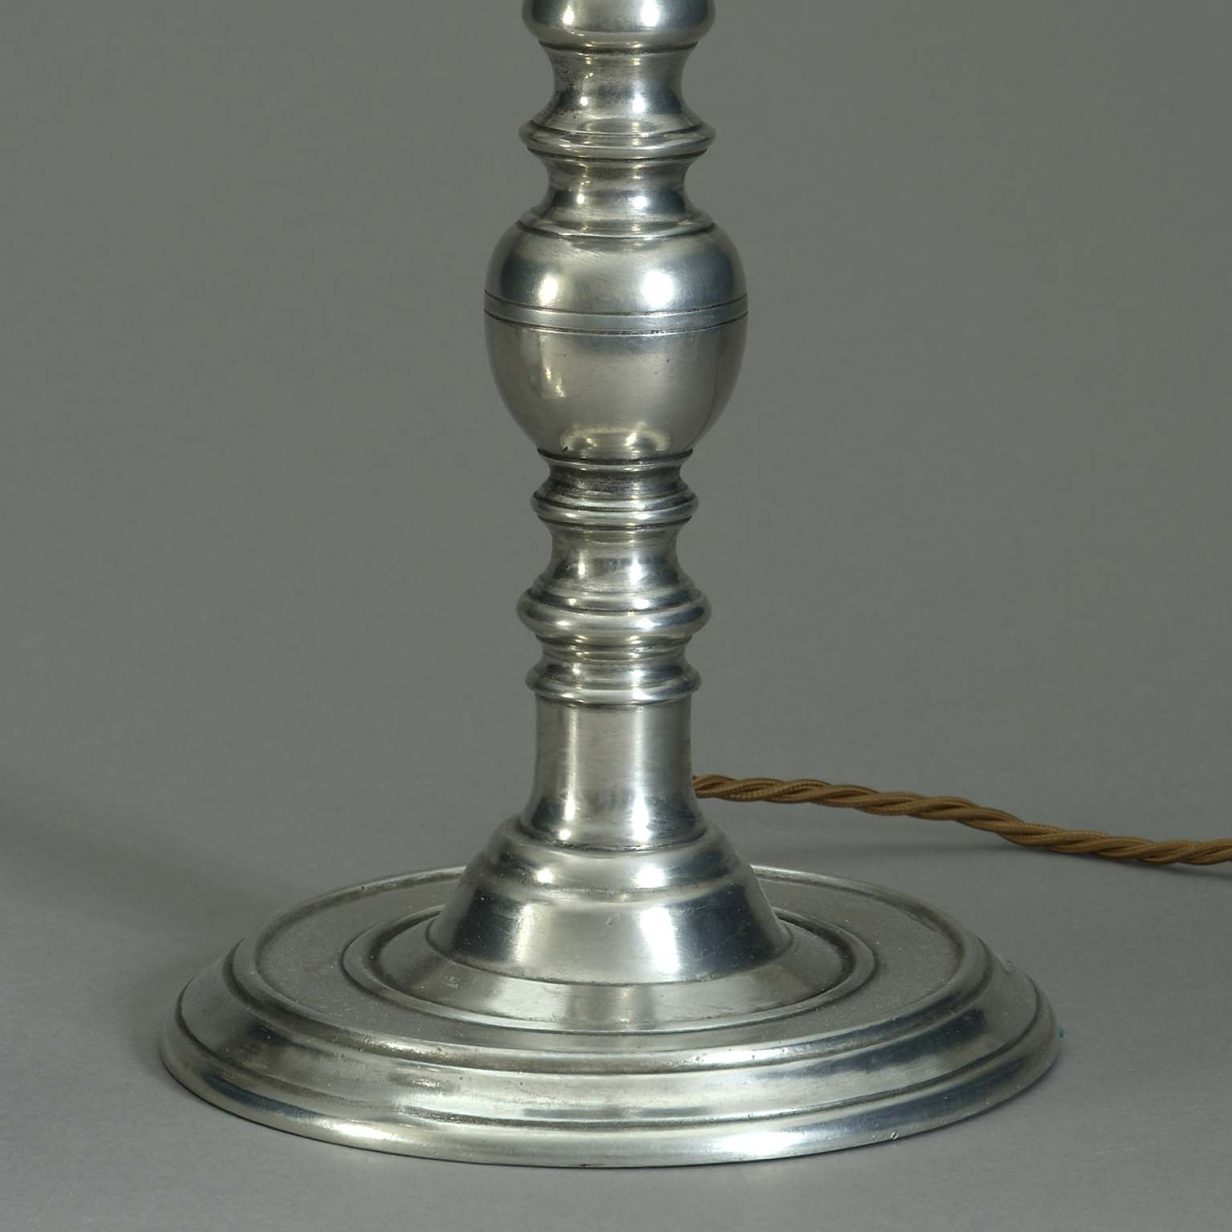 Pair of pewter lamps